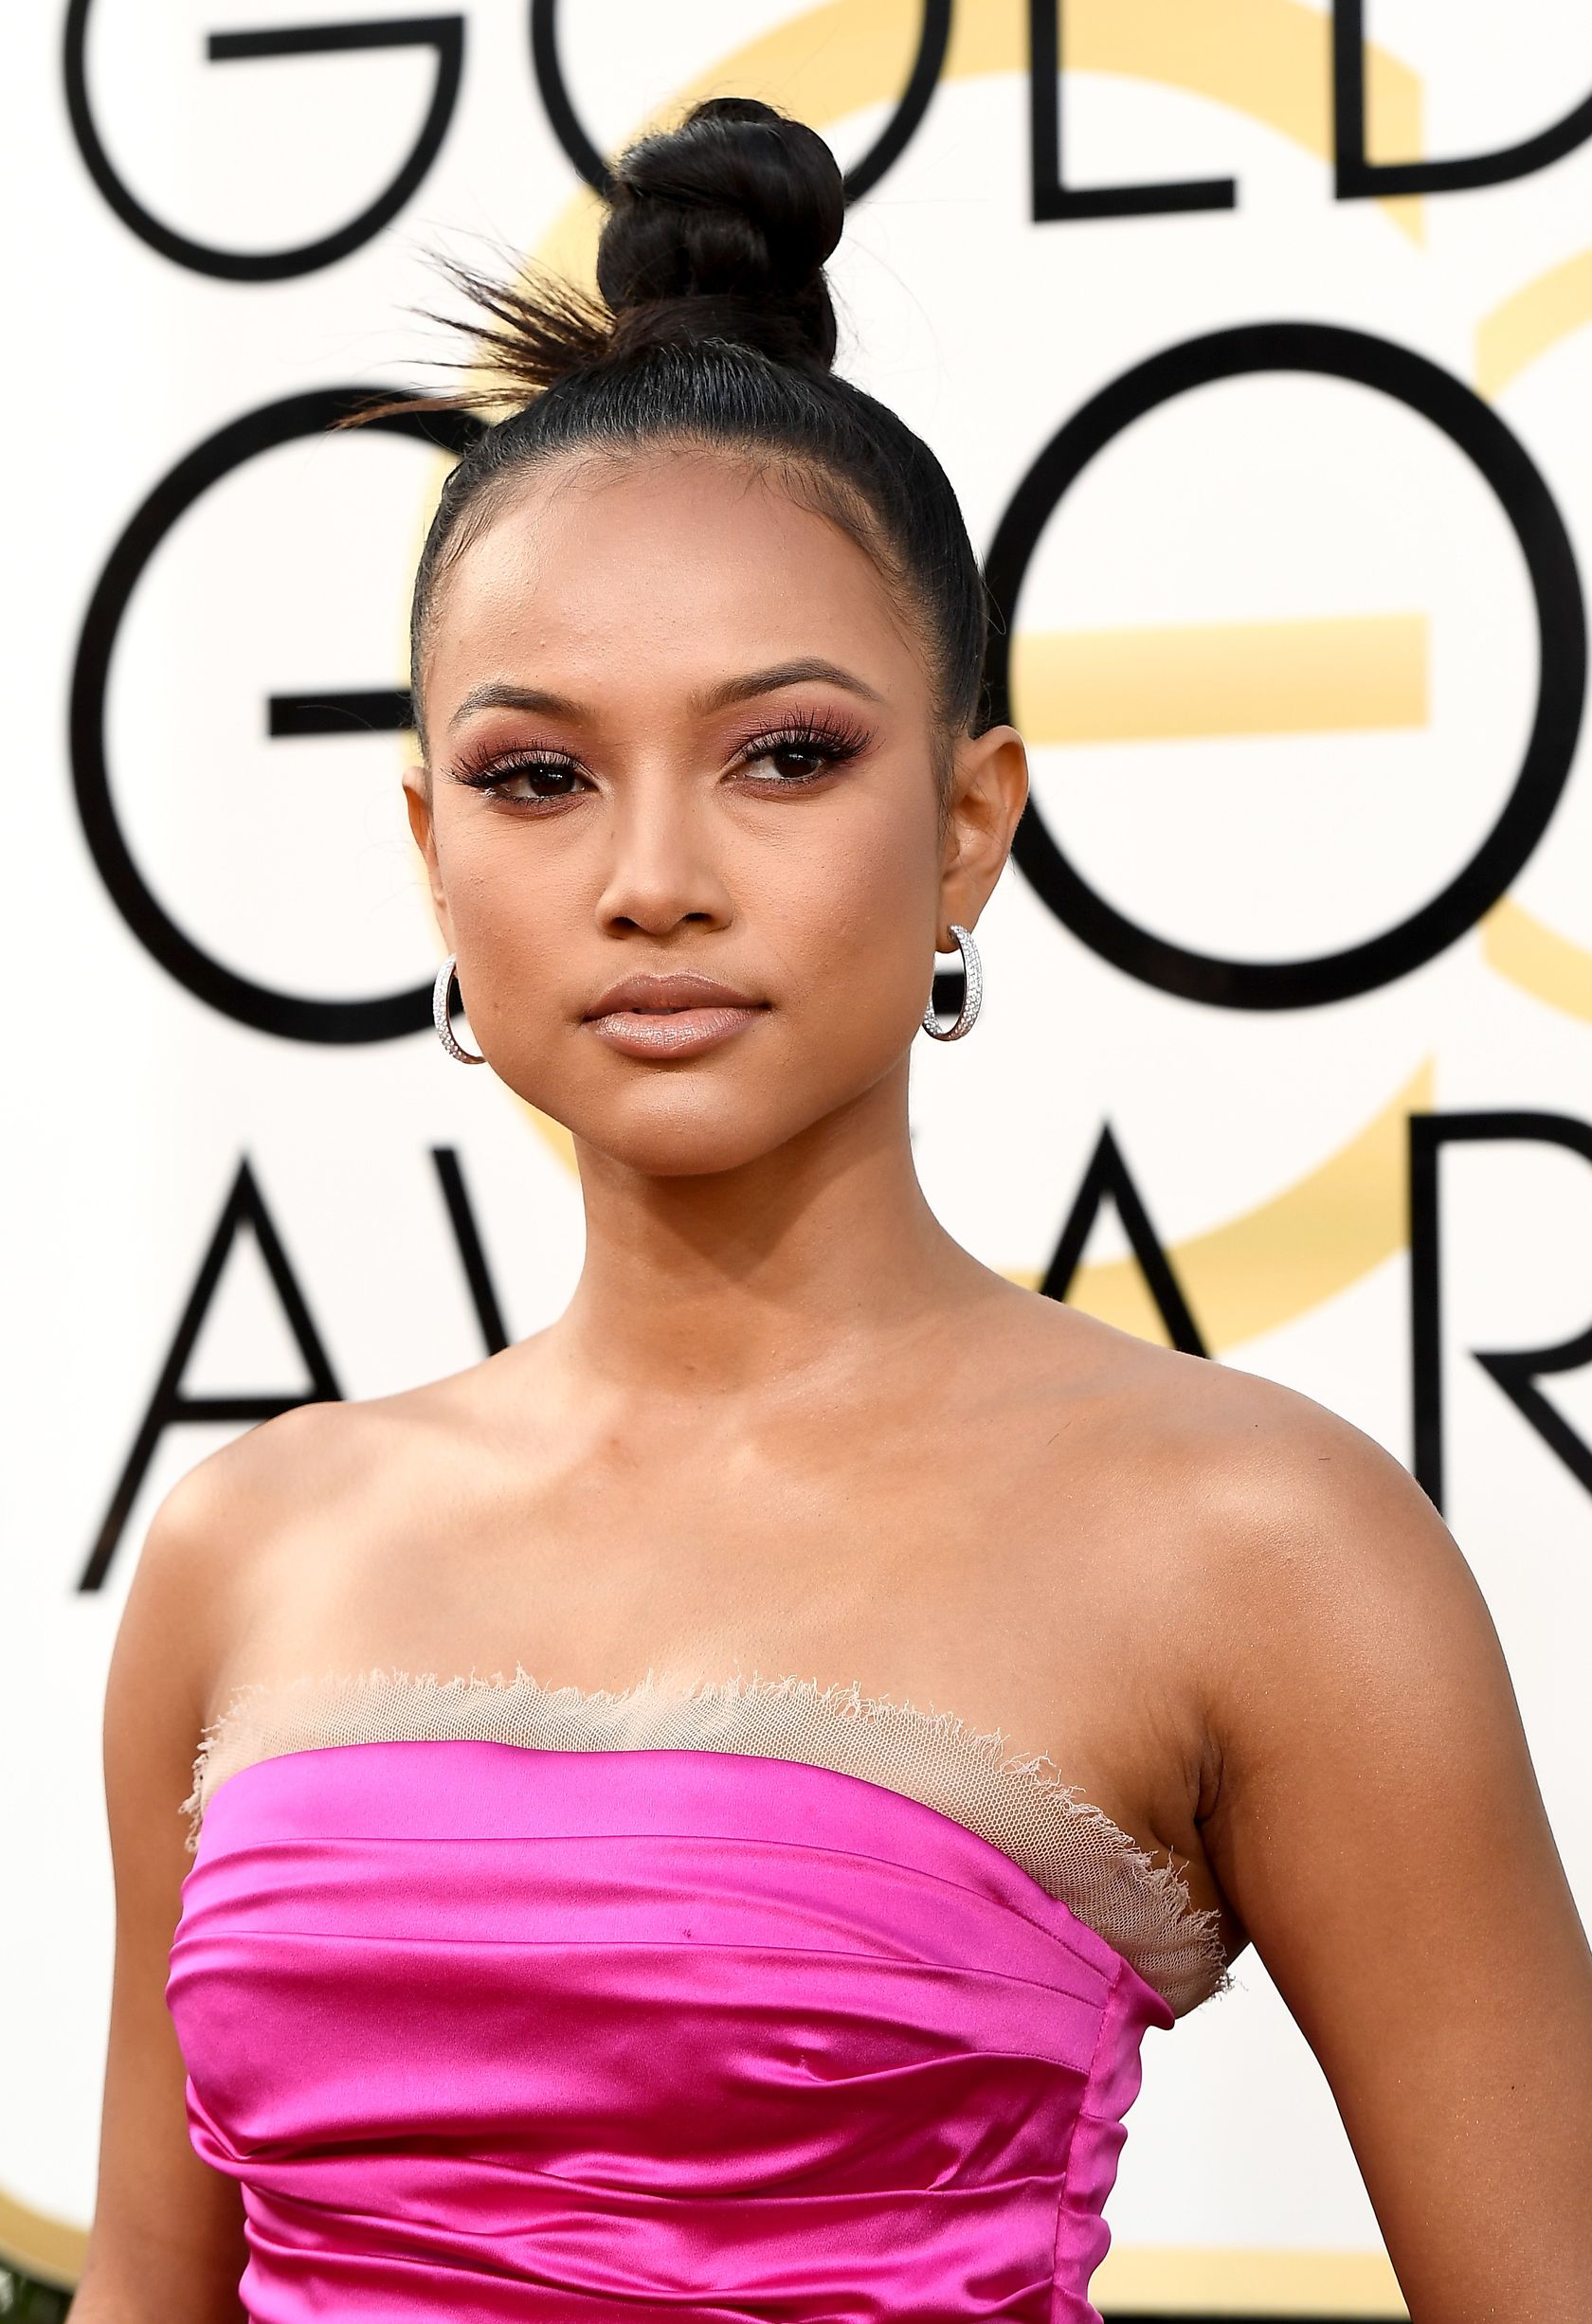 The 34-year old daughter of father Devon Minters and mother Cindy Adamson Karrueche Tran in 2023 photo. Karrueche Tran earned a  million dollar salary - leaving the net worth at 0.9 million in 2023